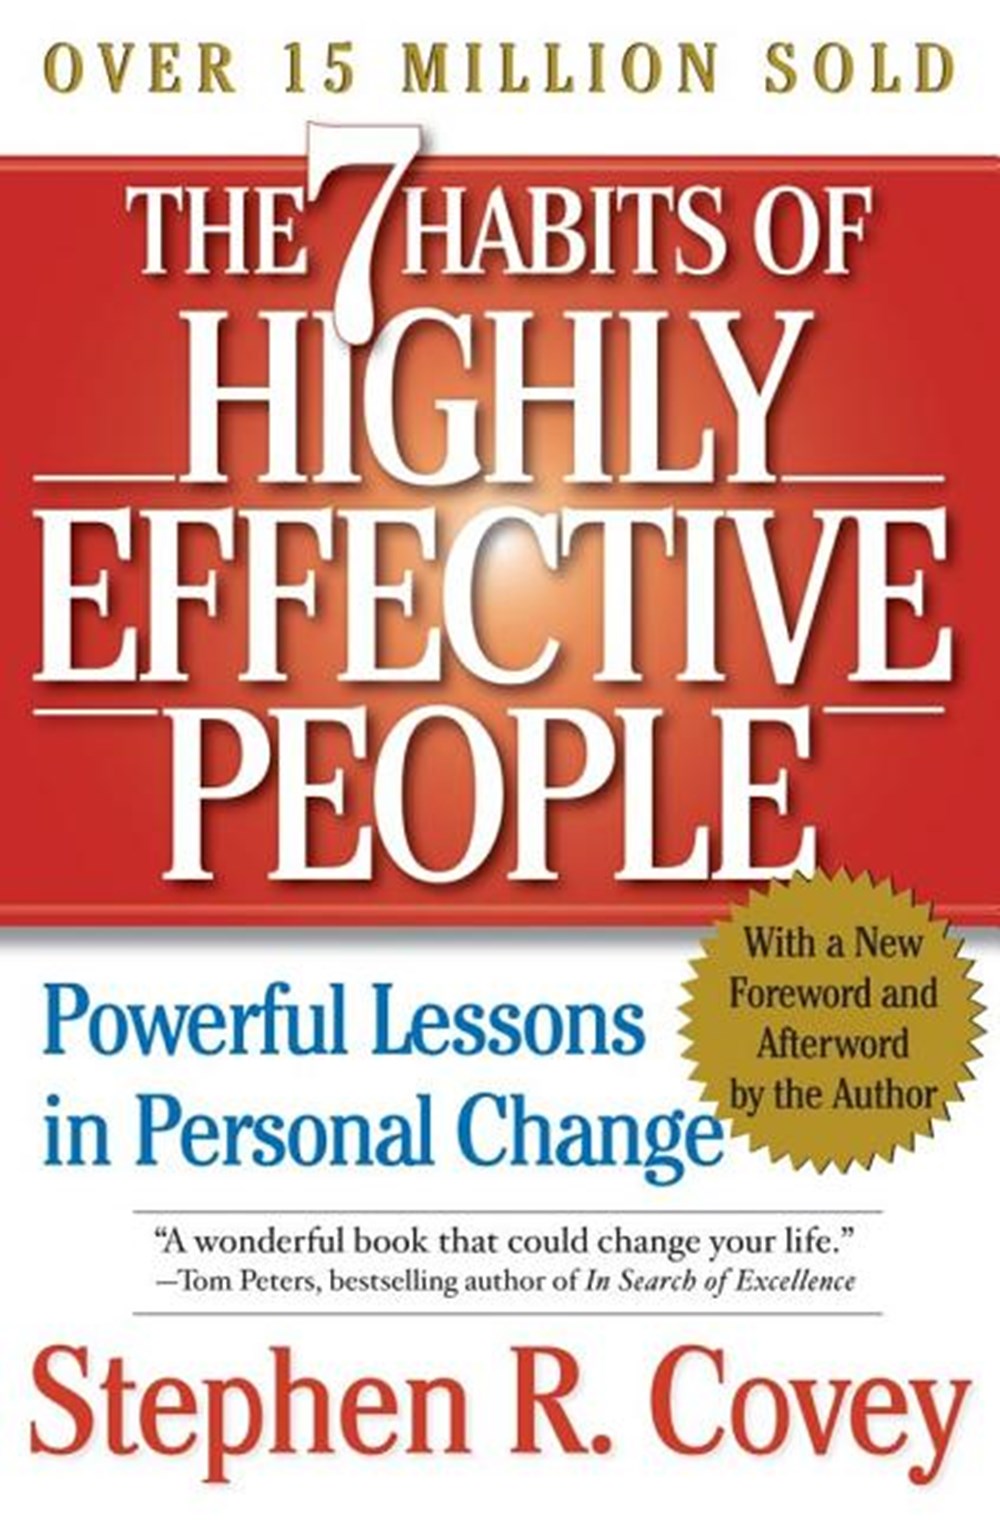 7 Habits of Highly Effective People: Powerful Lessons in Personal Change (REV)